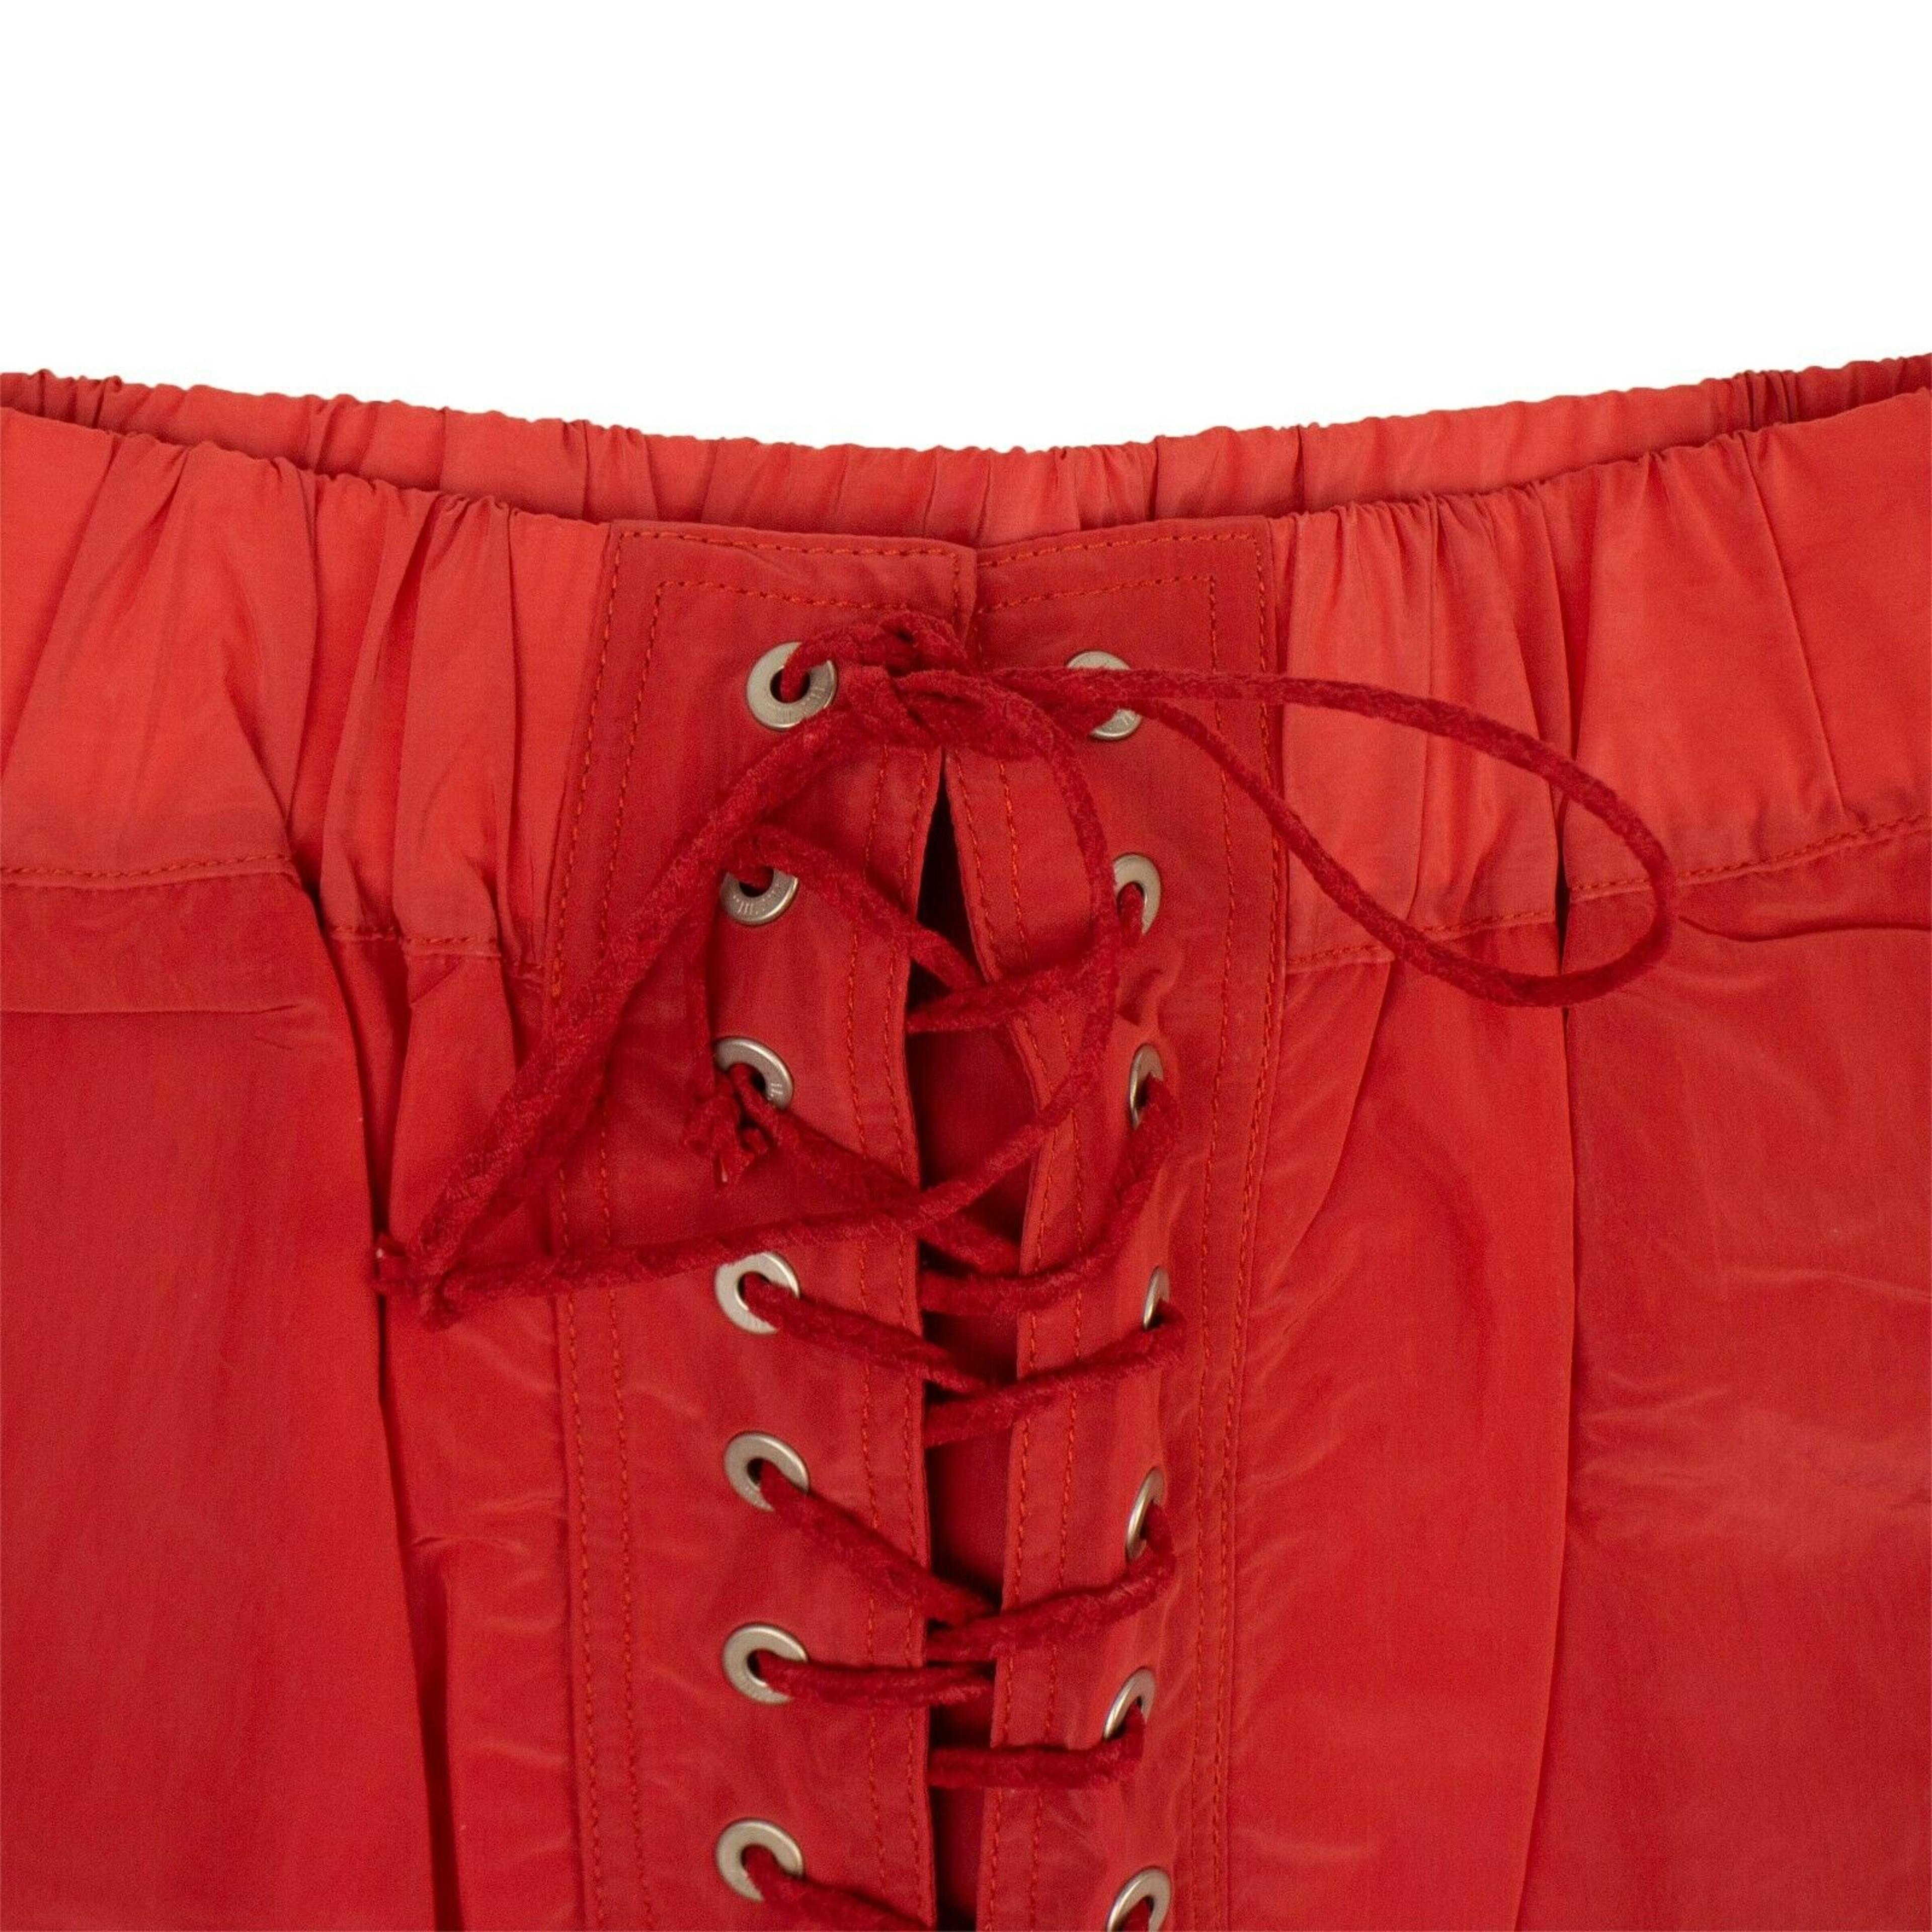 Alternate View 2 of Red Lace Up Track Short Pants